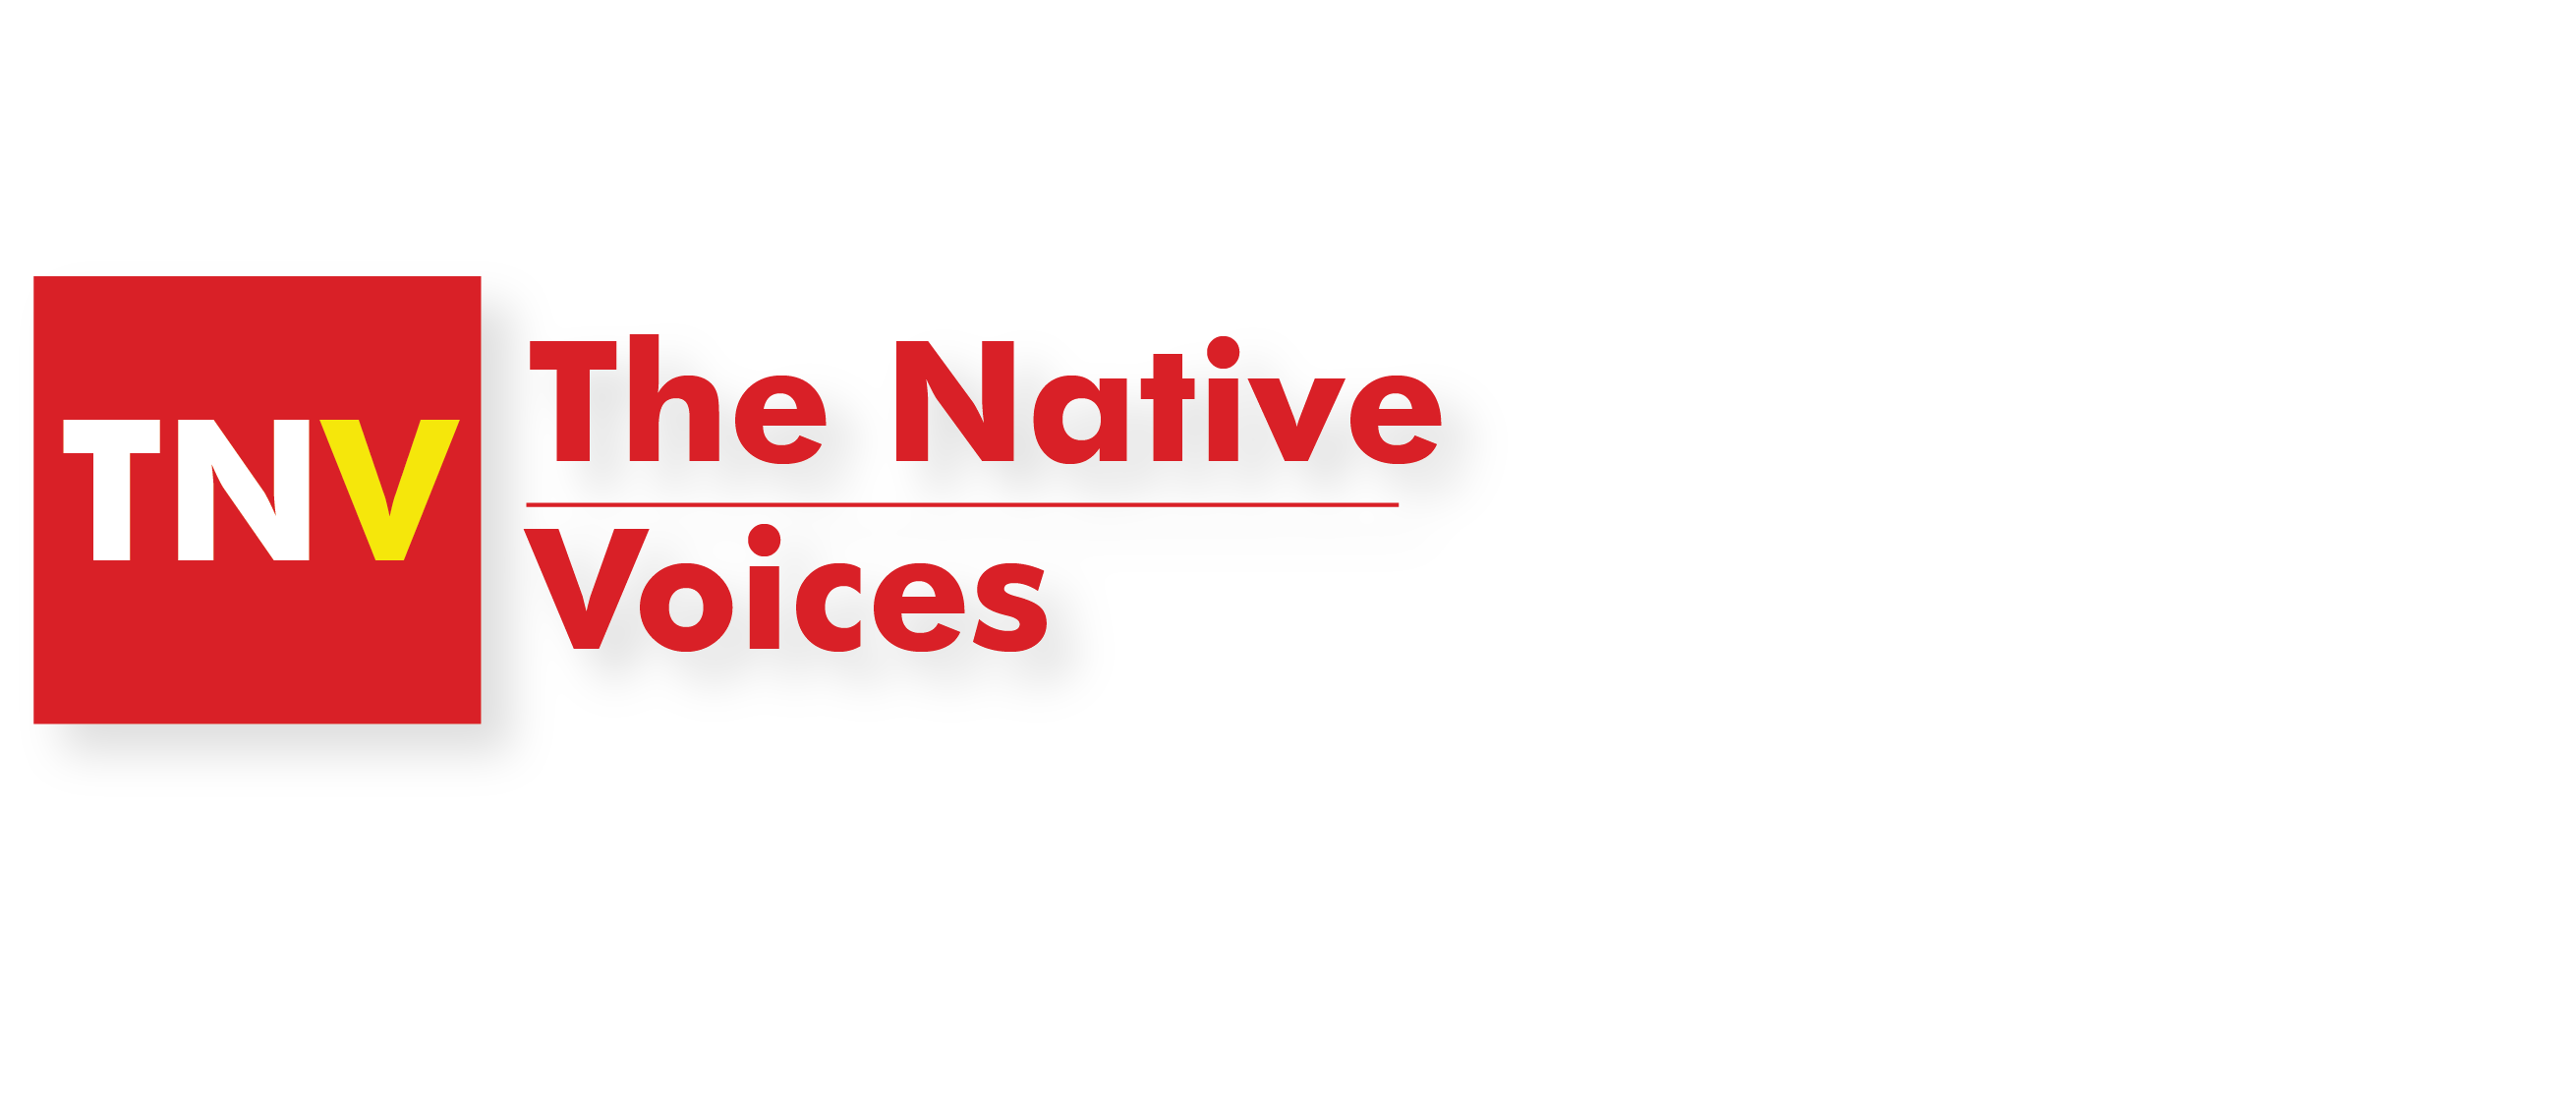 The Native Voices